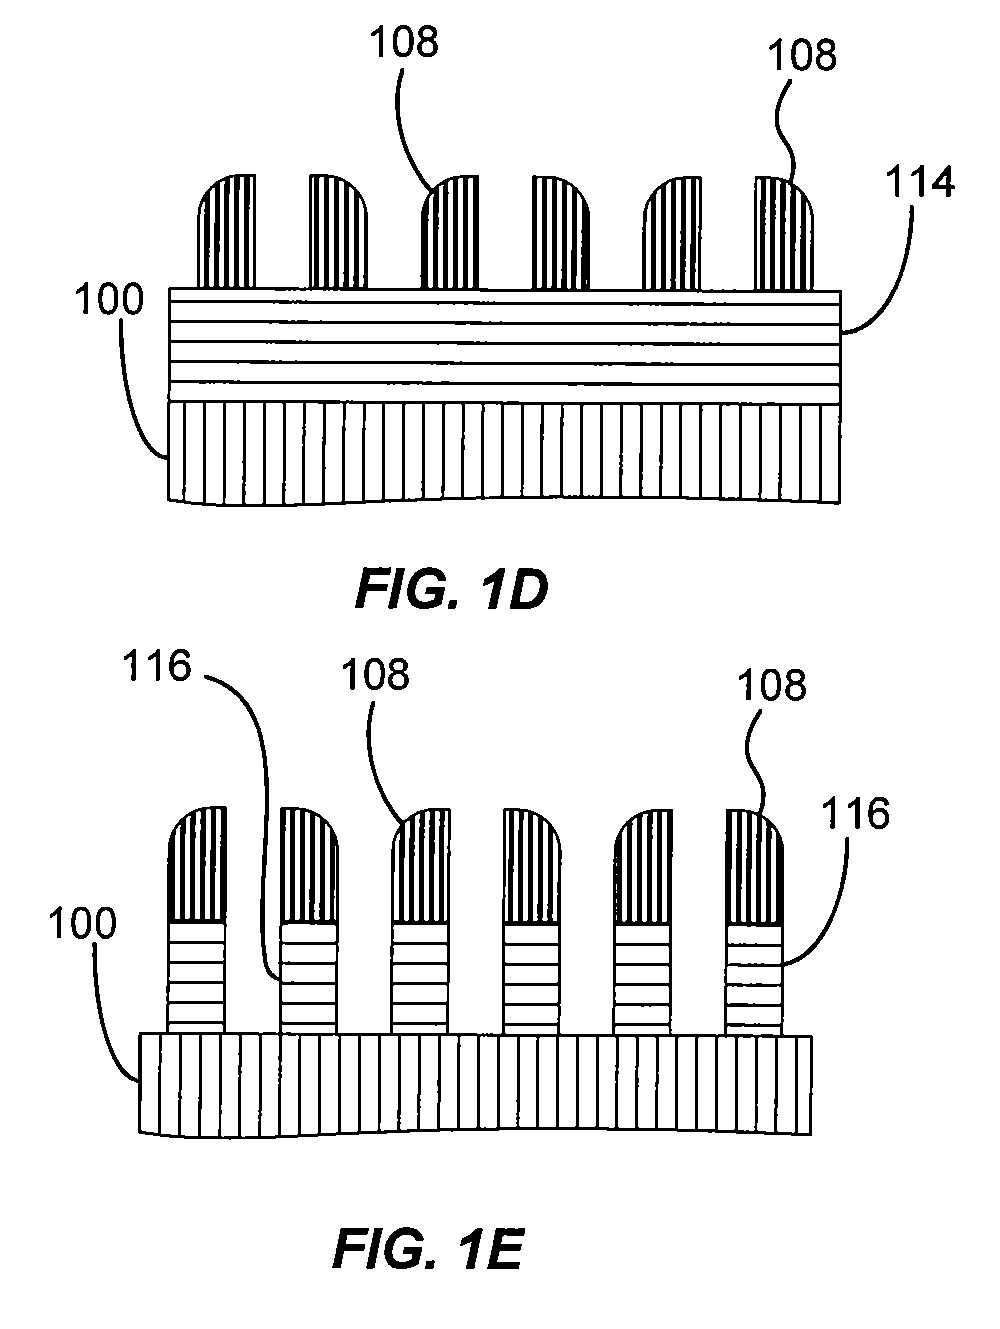 Self aligned double patterning flow with non-sacrificial features